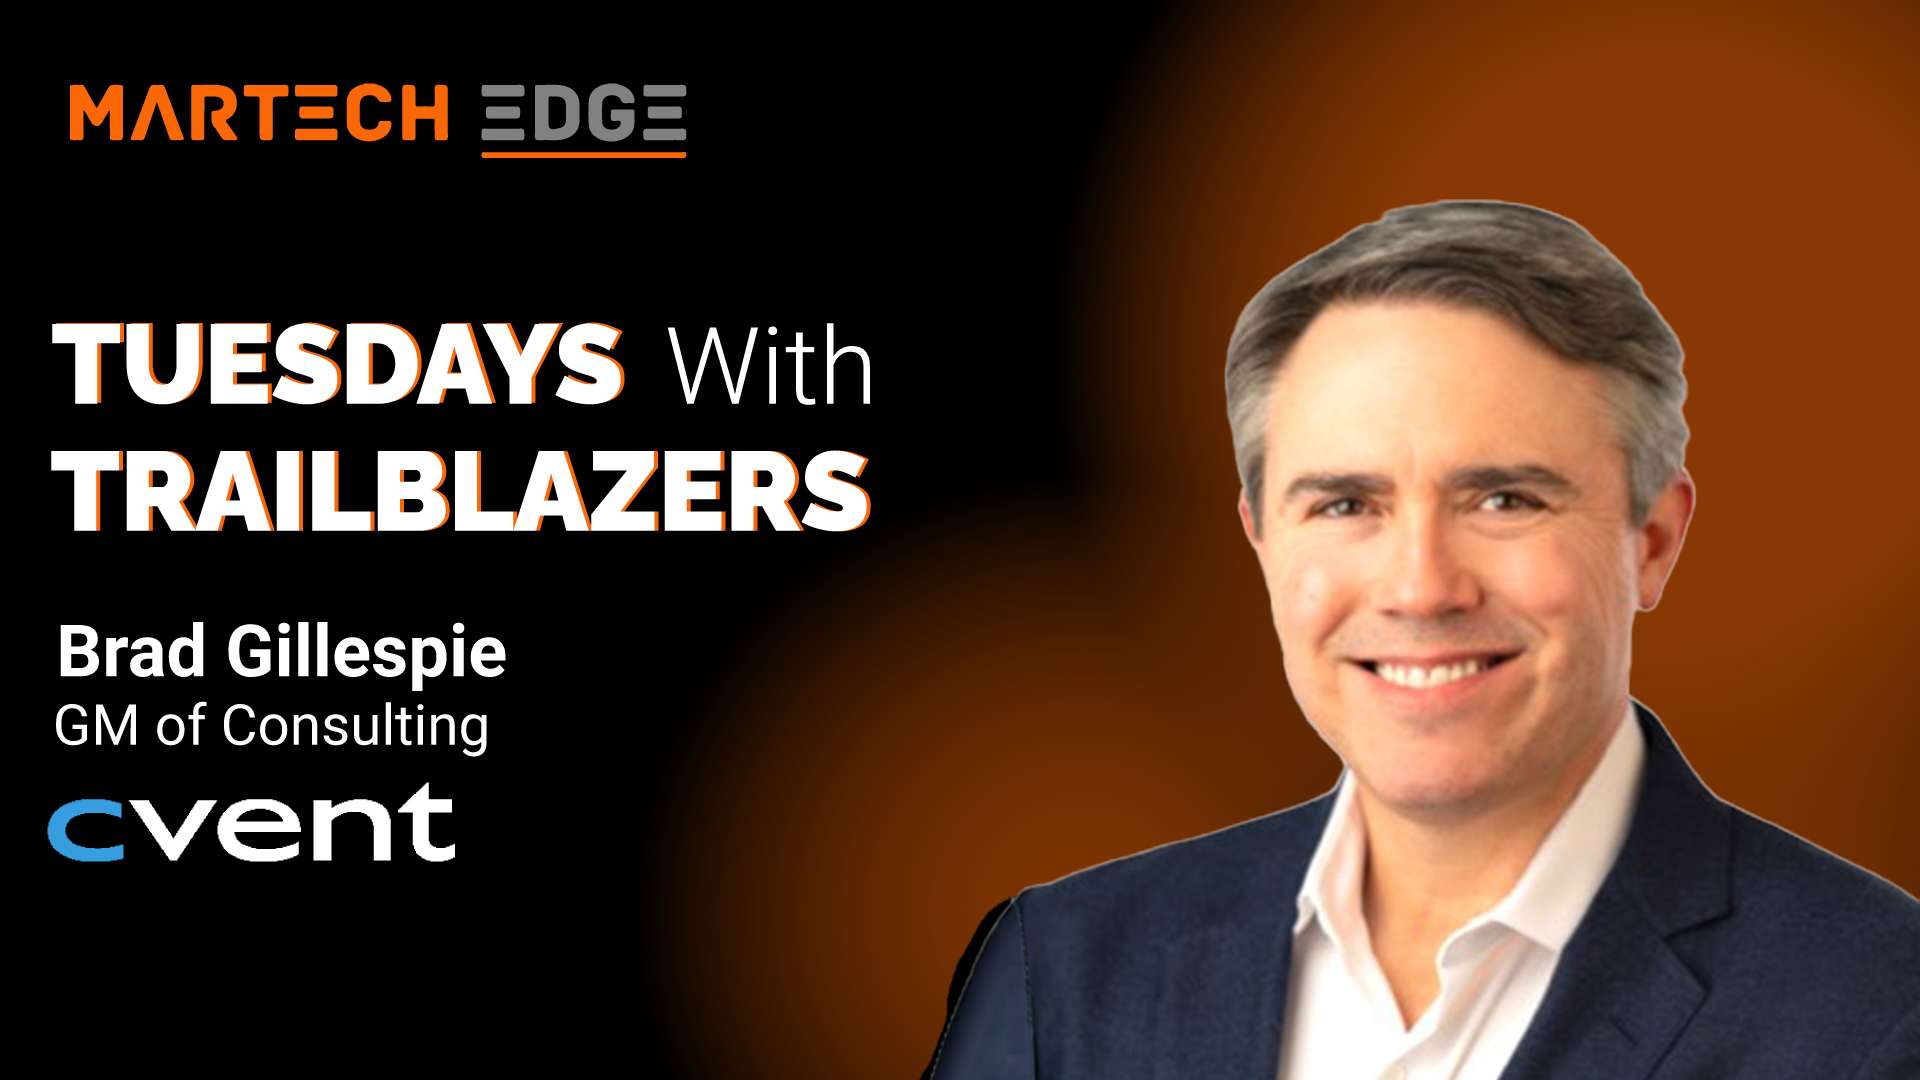  Tuesdays with Trailblazers ft. Brad Gillespie, GM of Consulting, Cvent. Martech Podcast